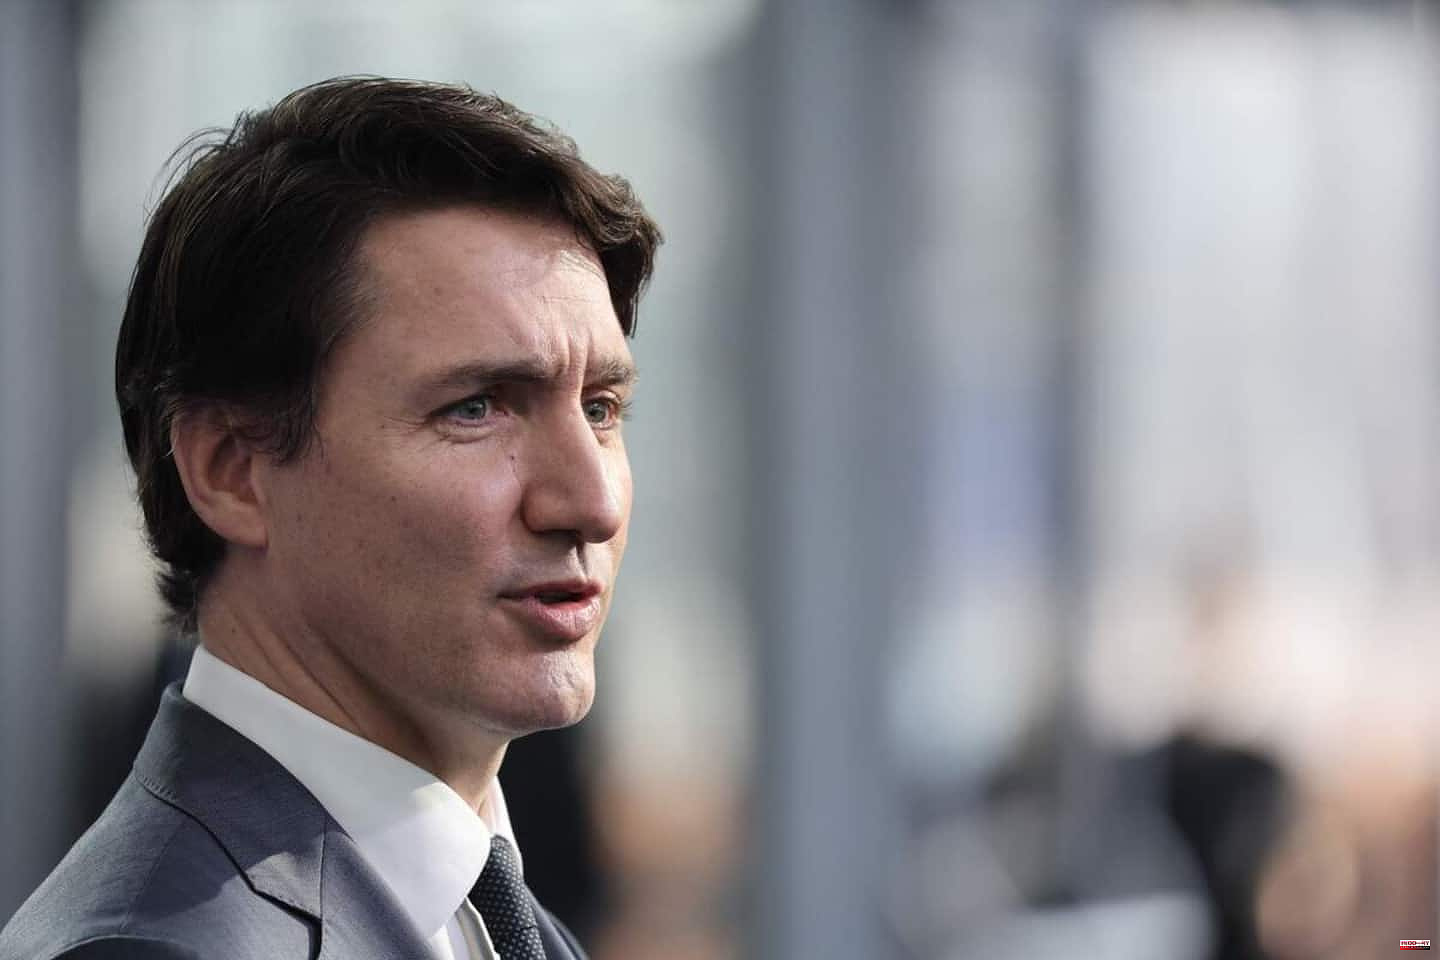 Huawei ban: a “responsible decision”, according to Trudeau